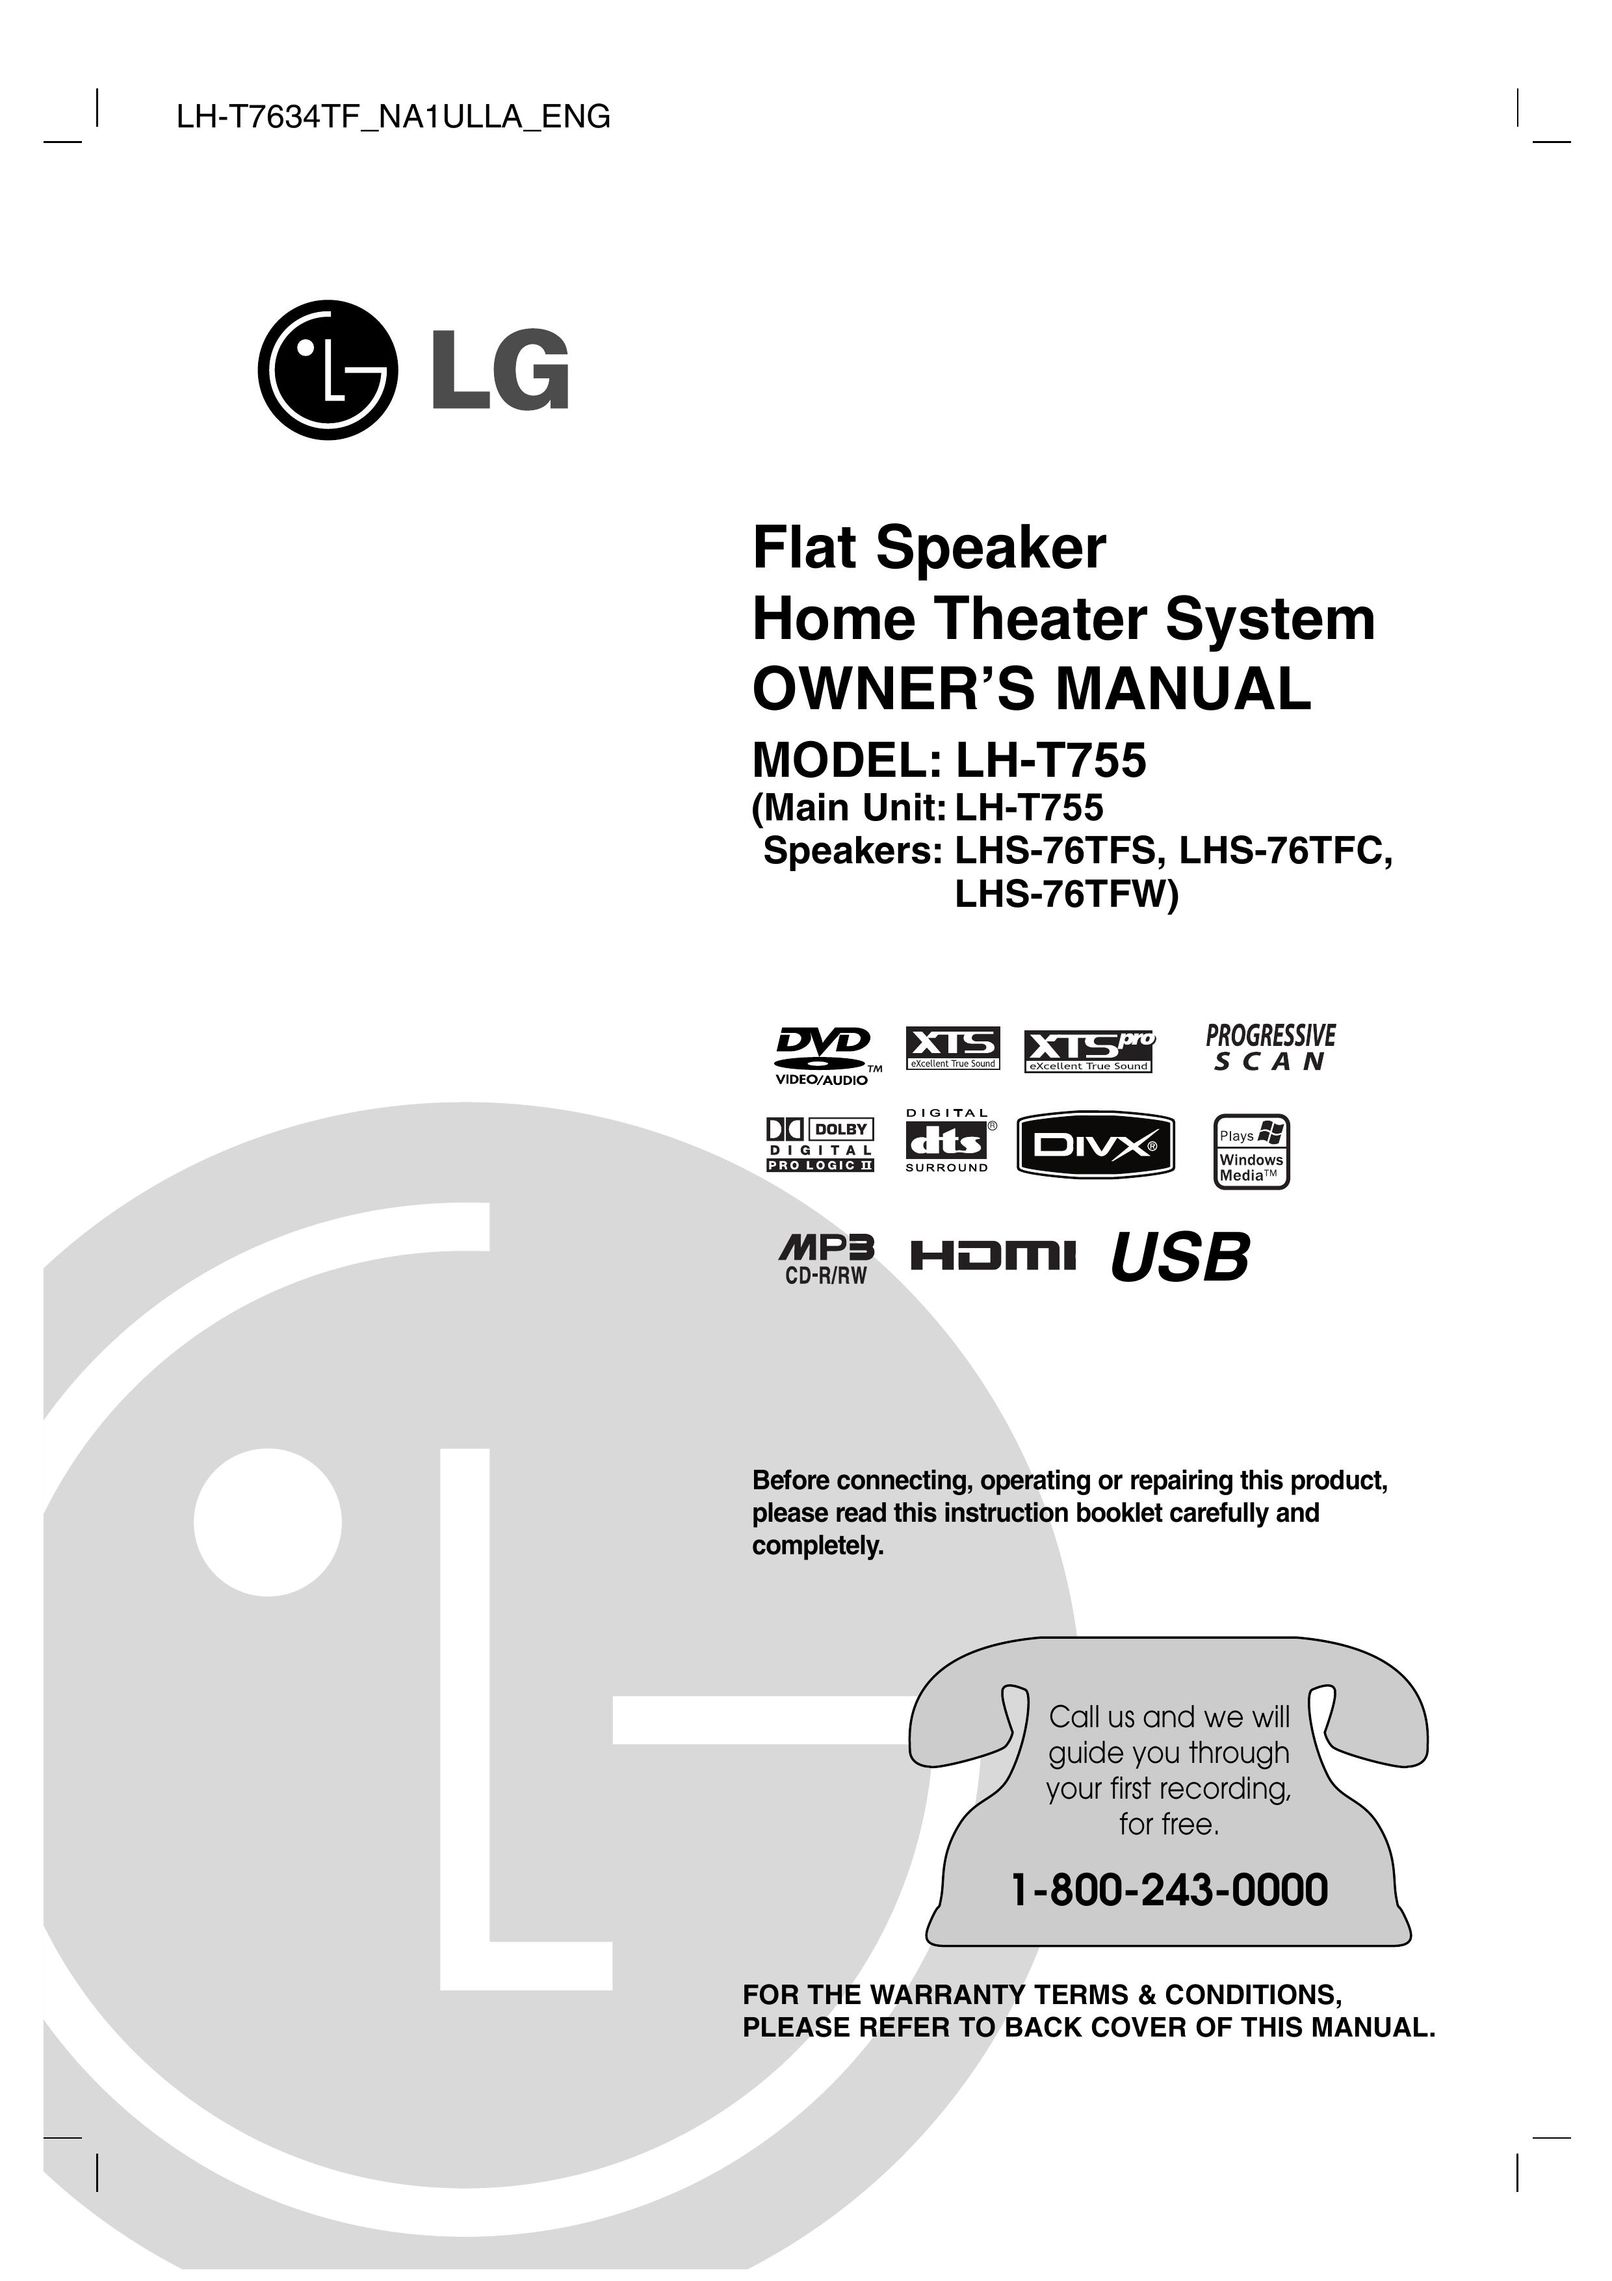 LG Electronics LHS-76TFC Home Theater System User Manual